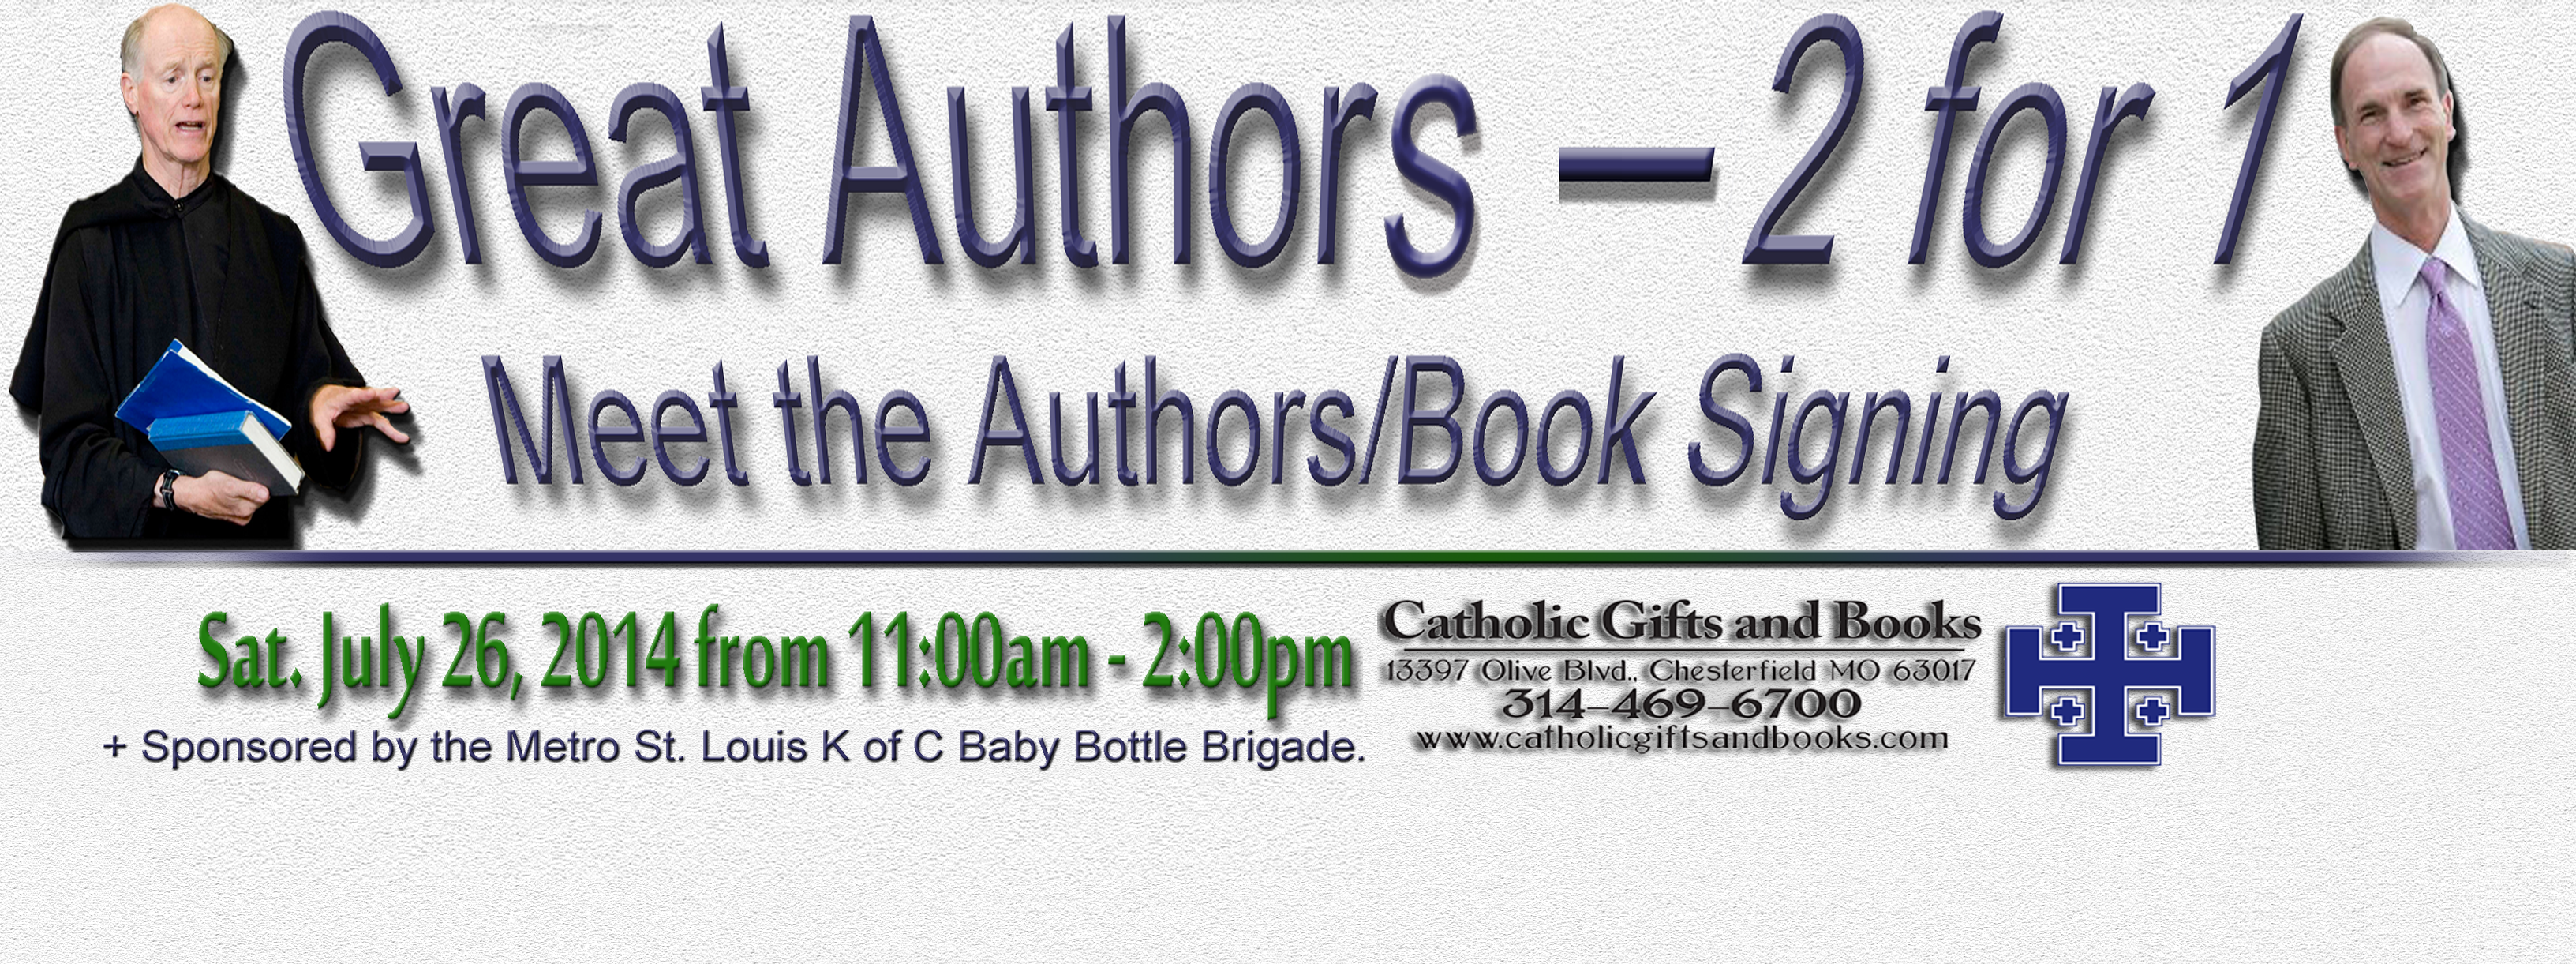 Great Authors - 2 for 1 Book Signing Banner